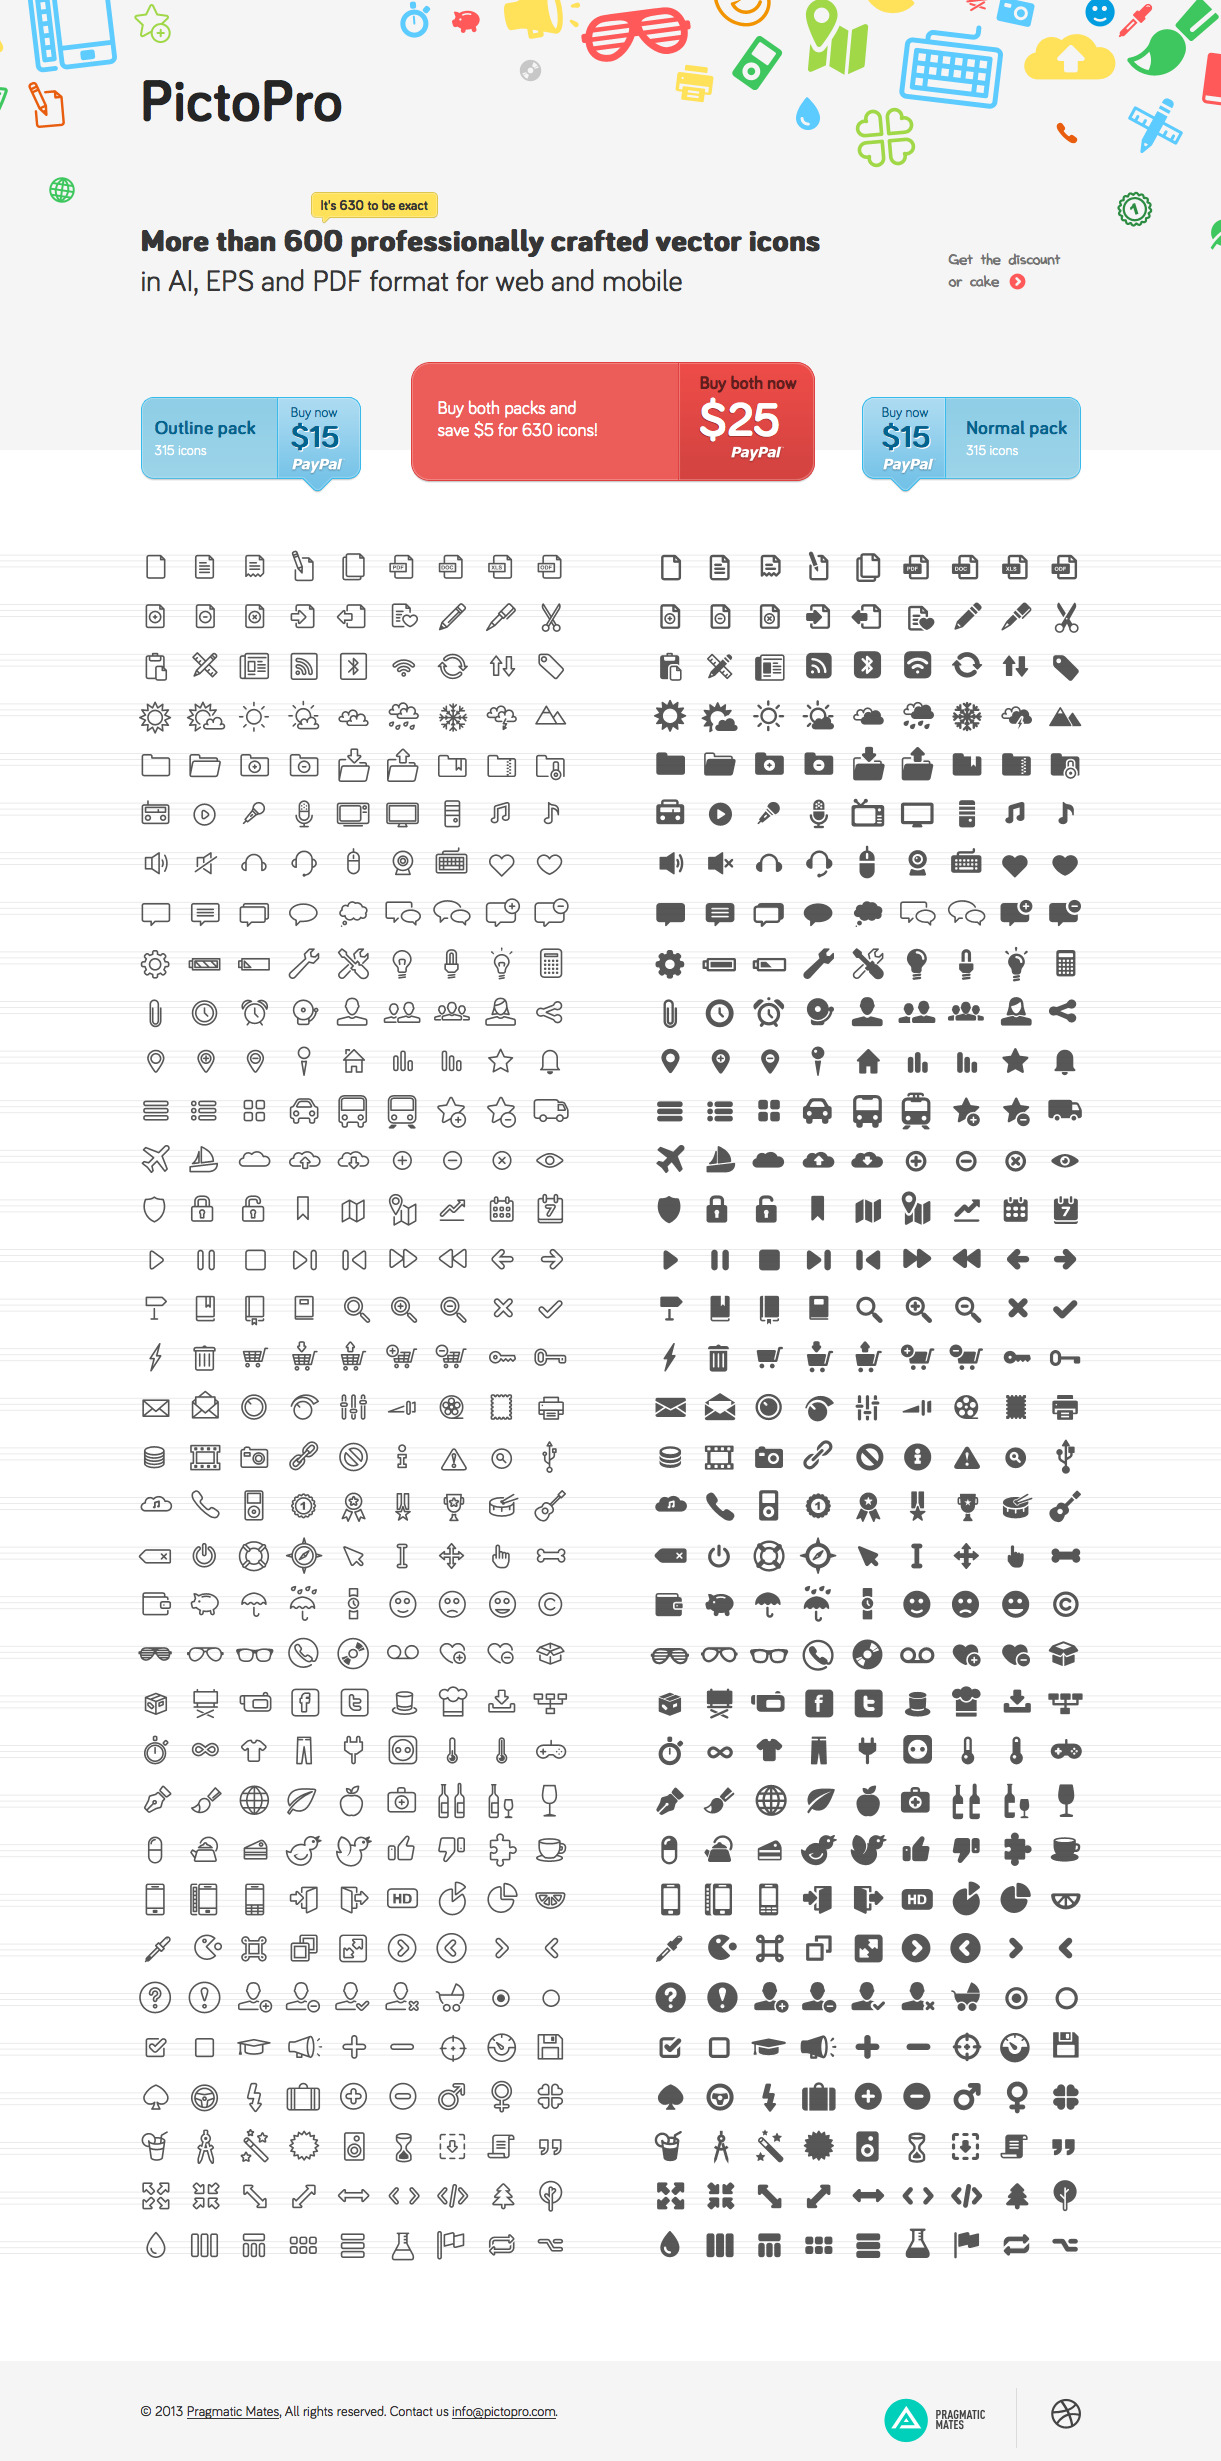 PictoPro  Professional vector icons and pictograms